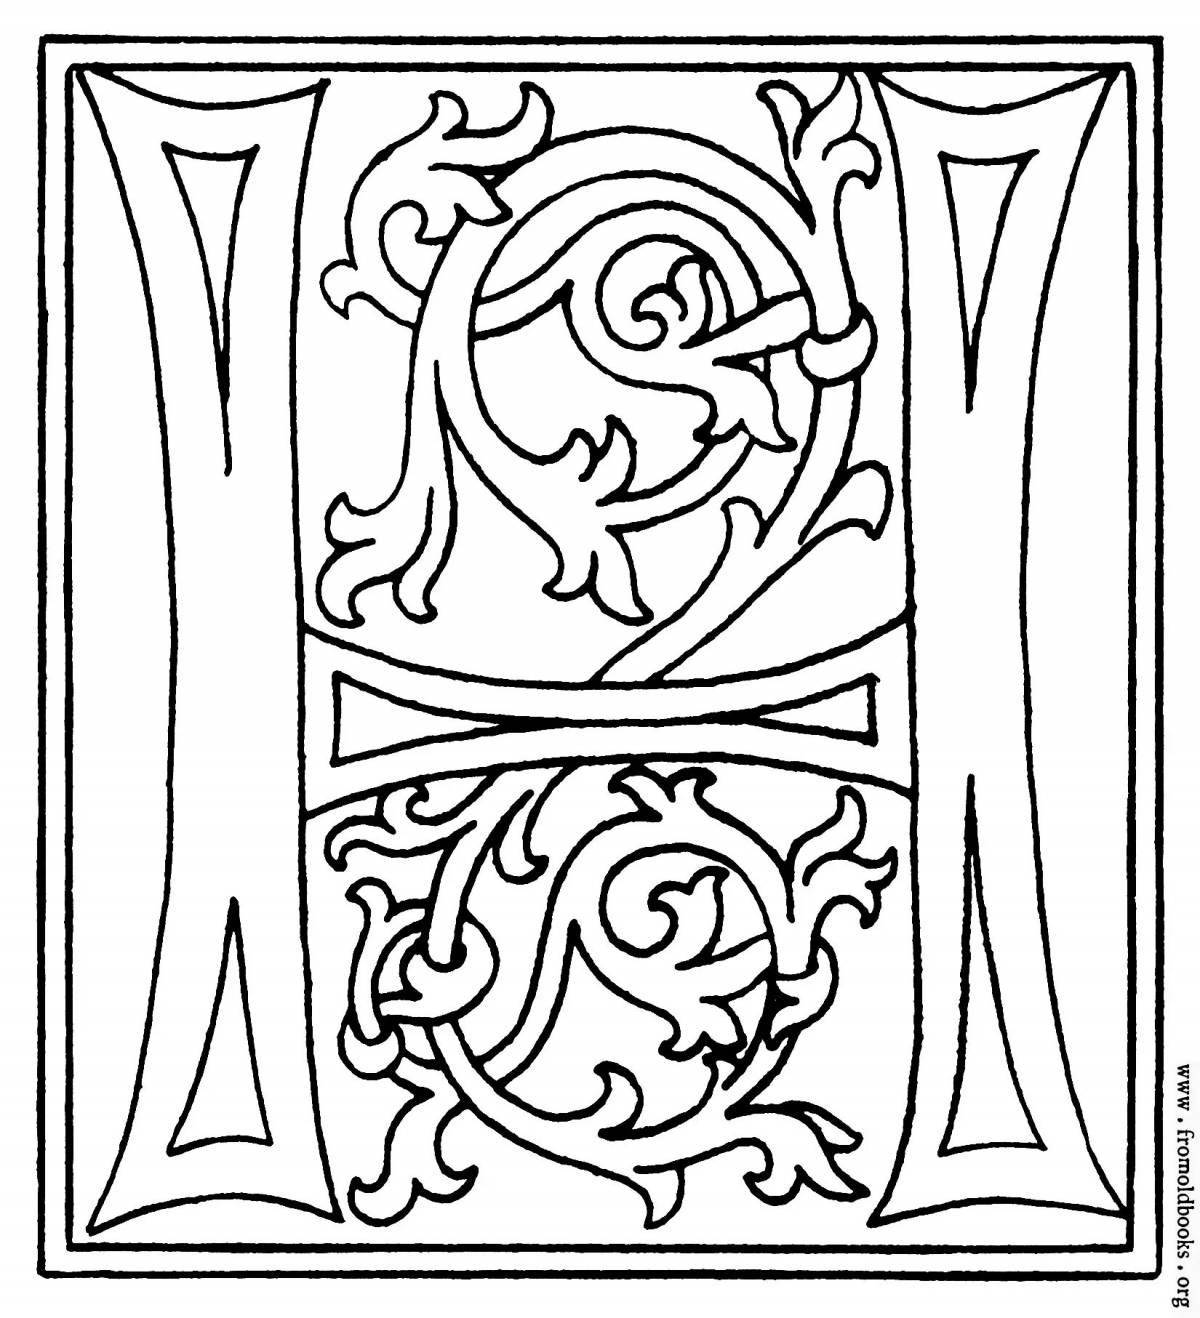 Initial fabulous coloring page